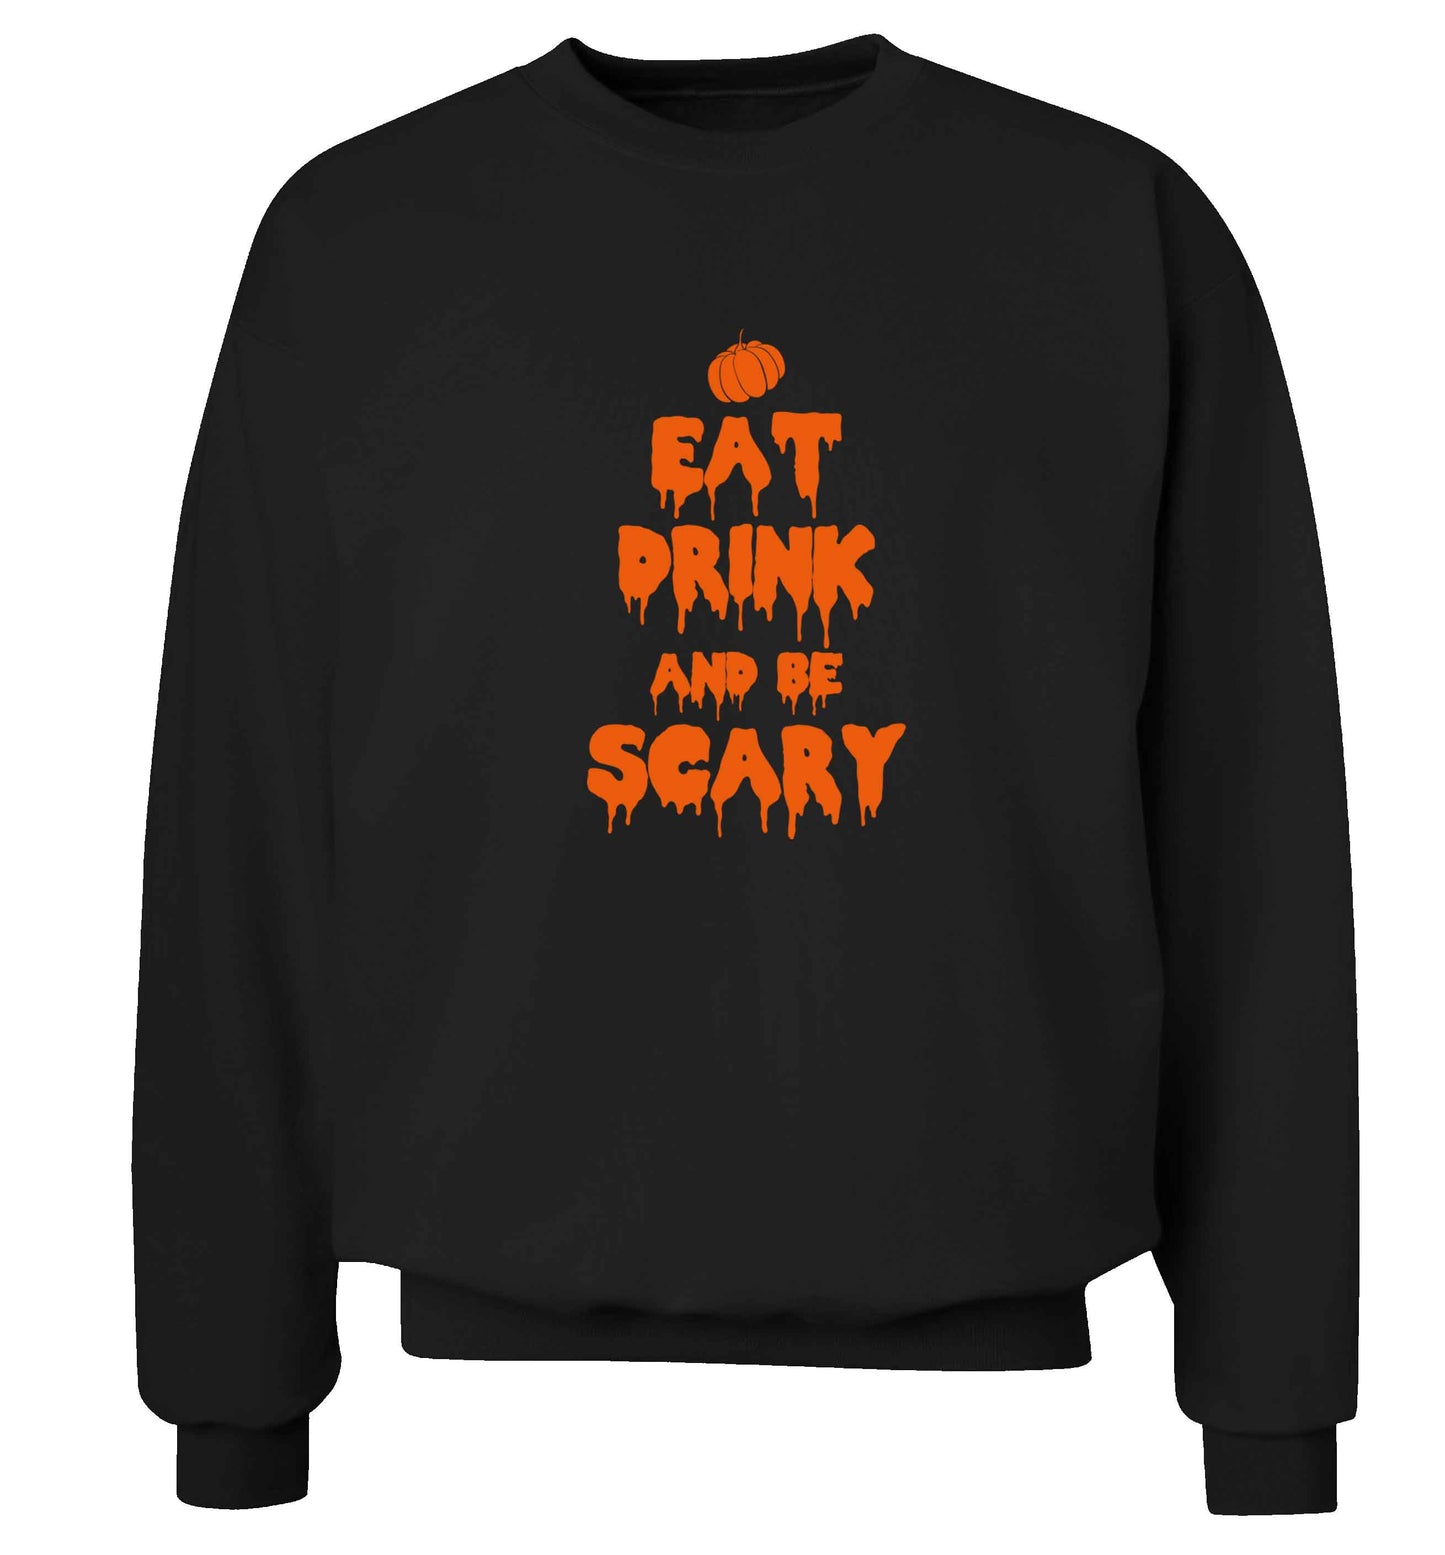 Eat drink and be scary adult's unisex black sweater 2XL